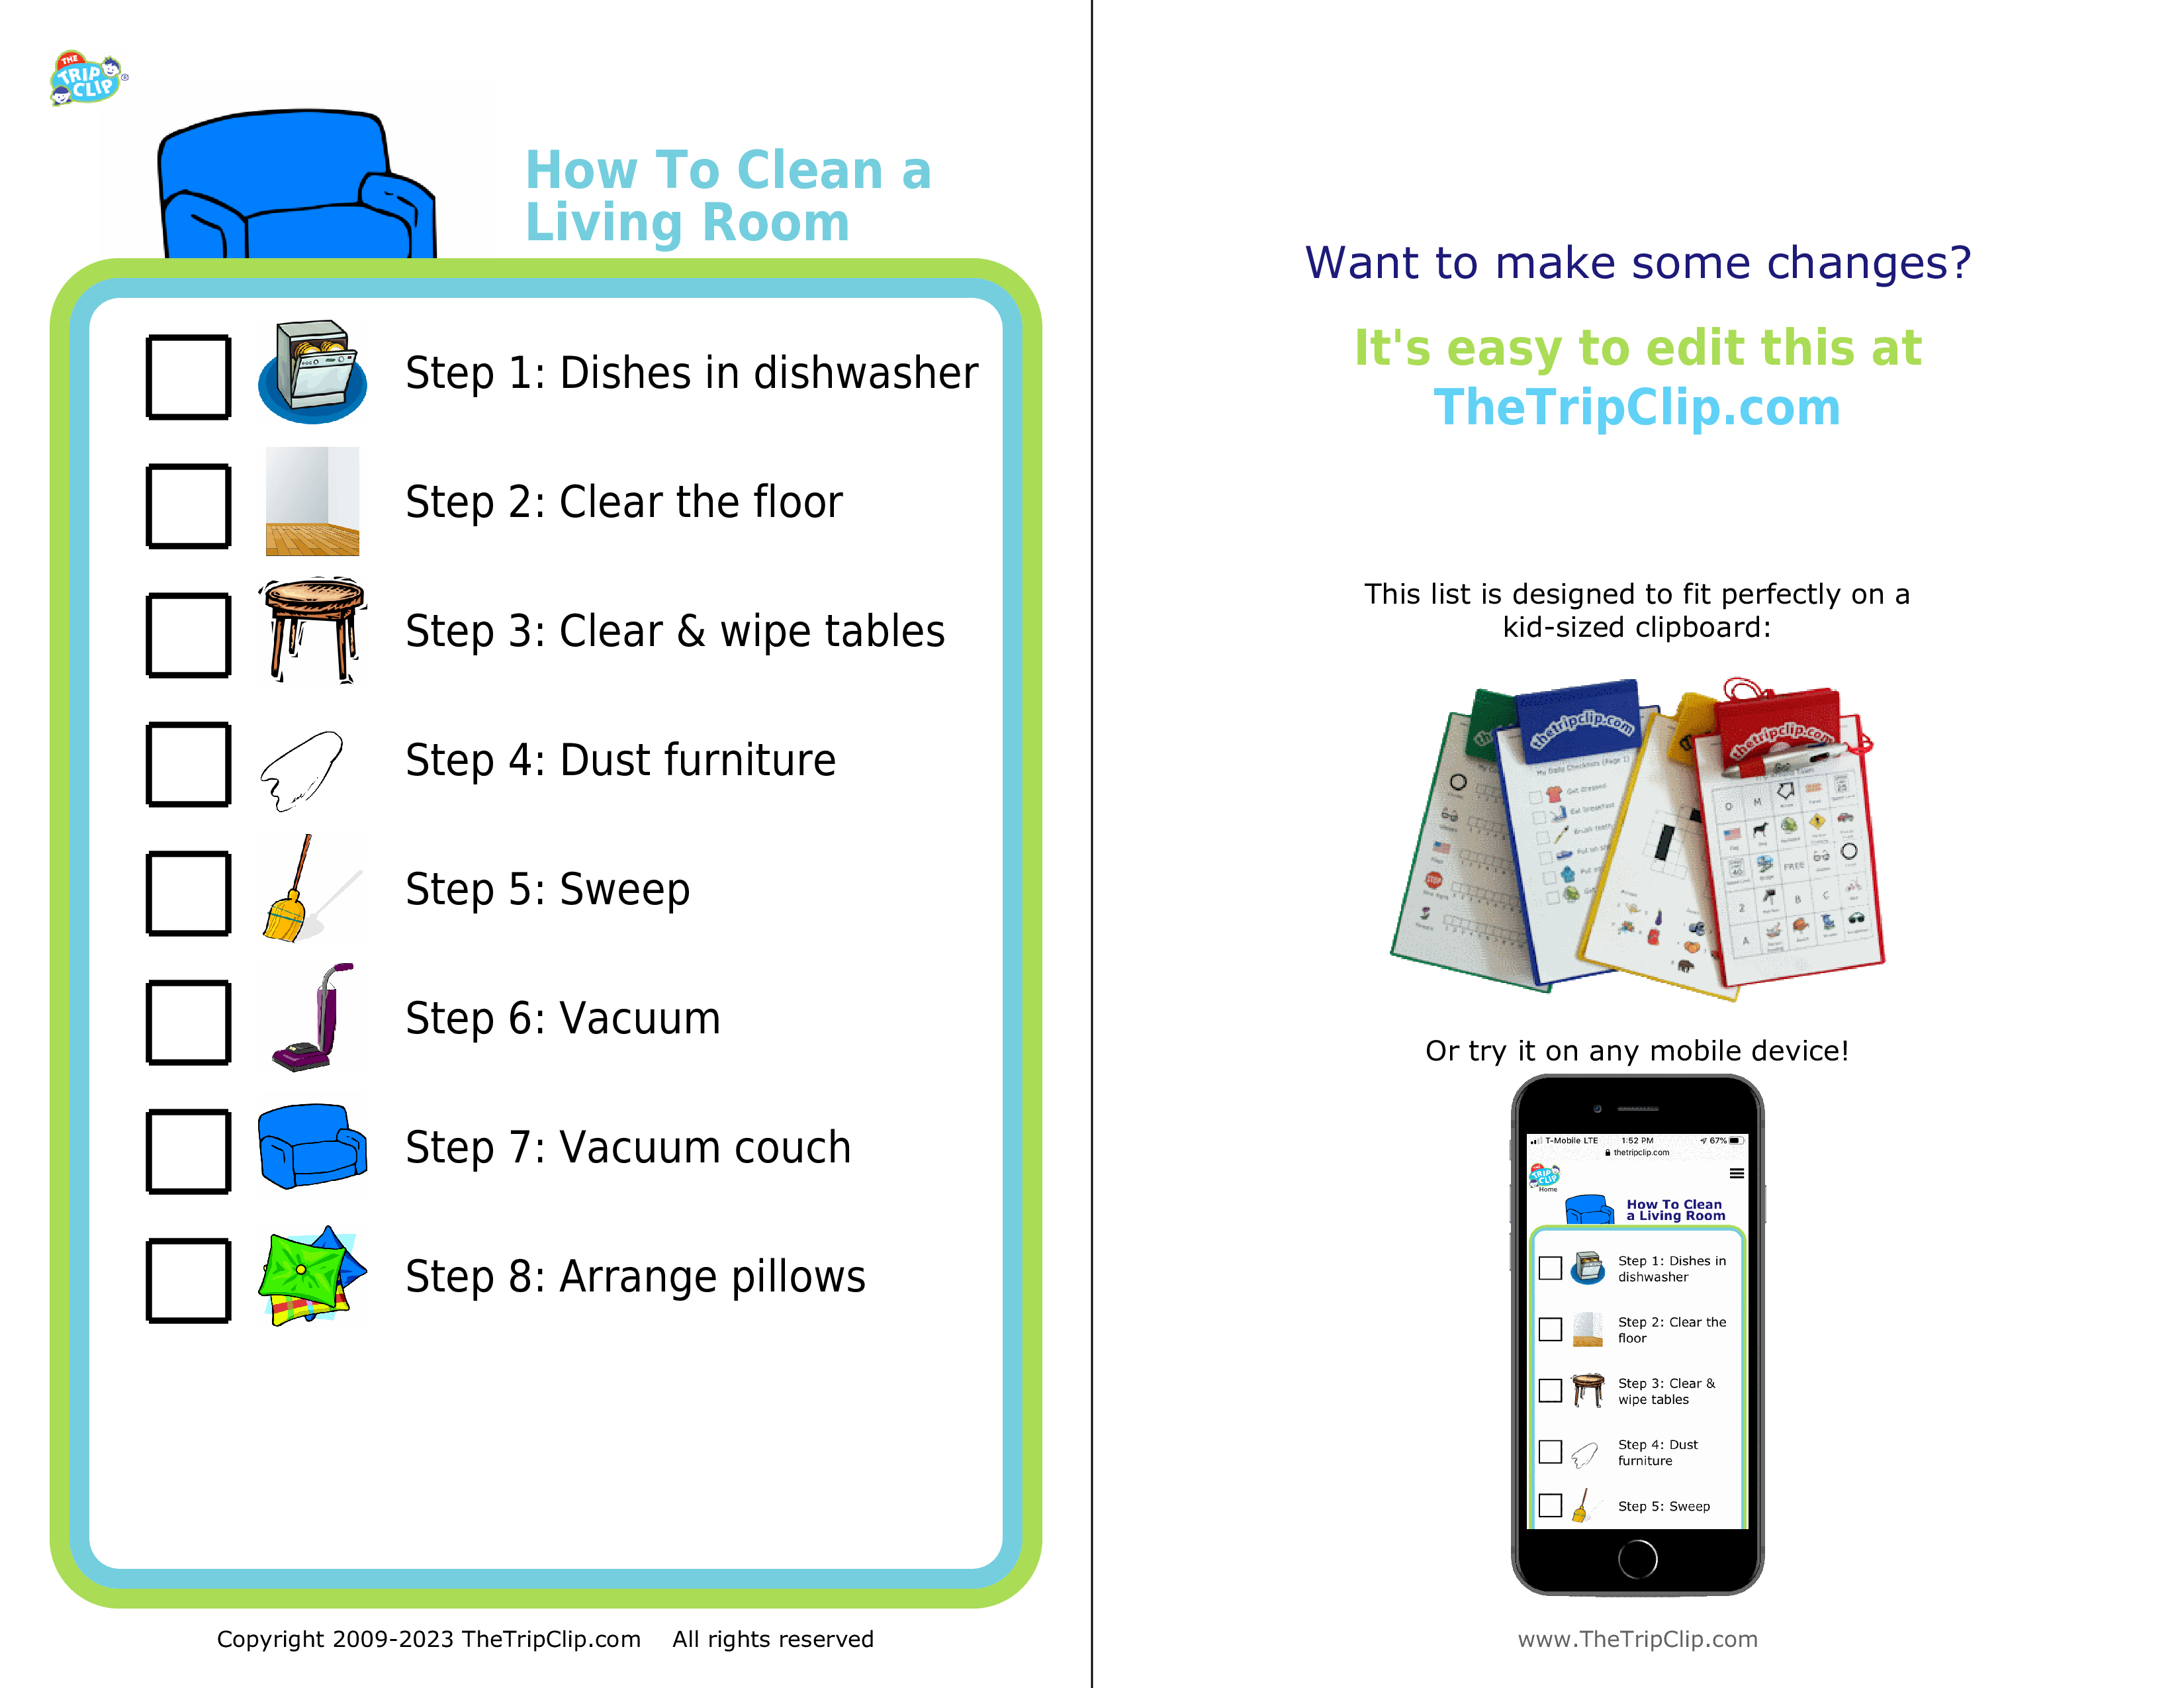 Picture checklists to teach kids to clean a living or dining room in 8 steps